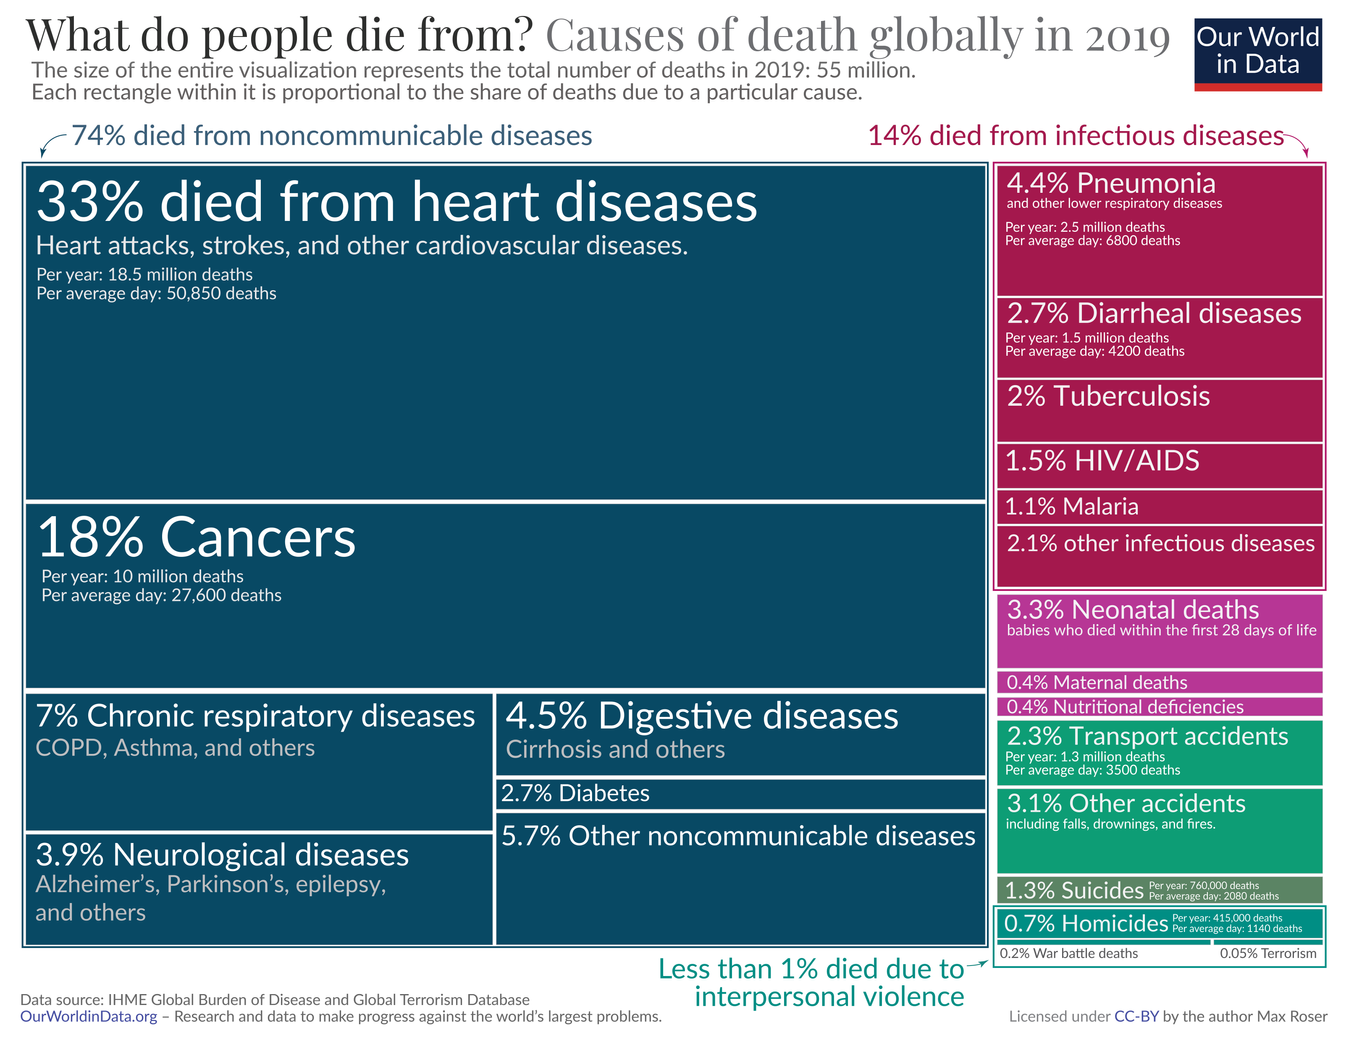 Credits: https://ourworldindata.org/causes-of-death